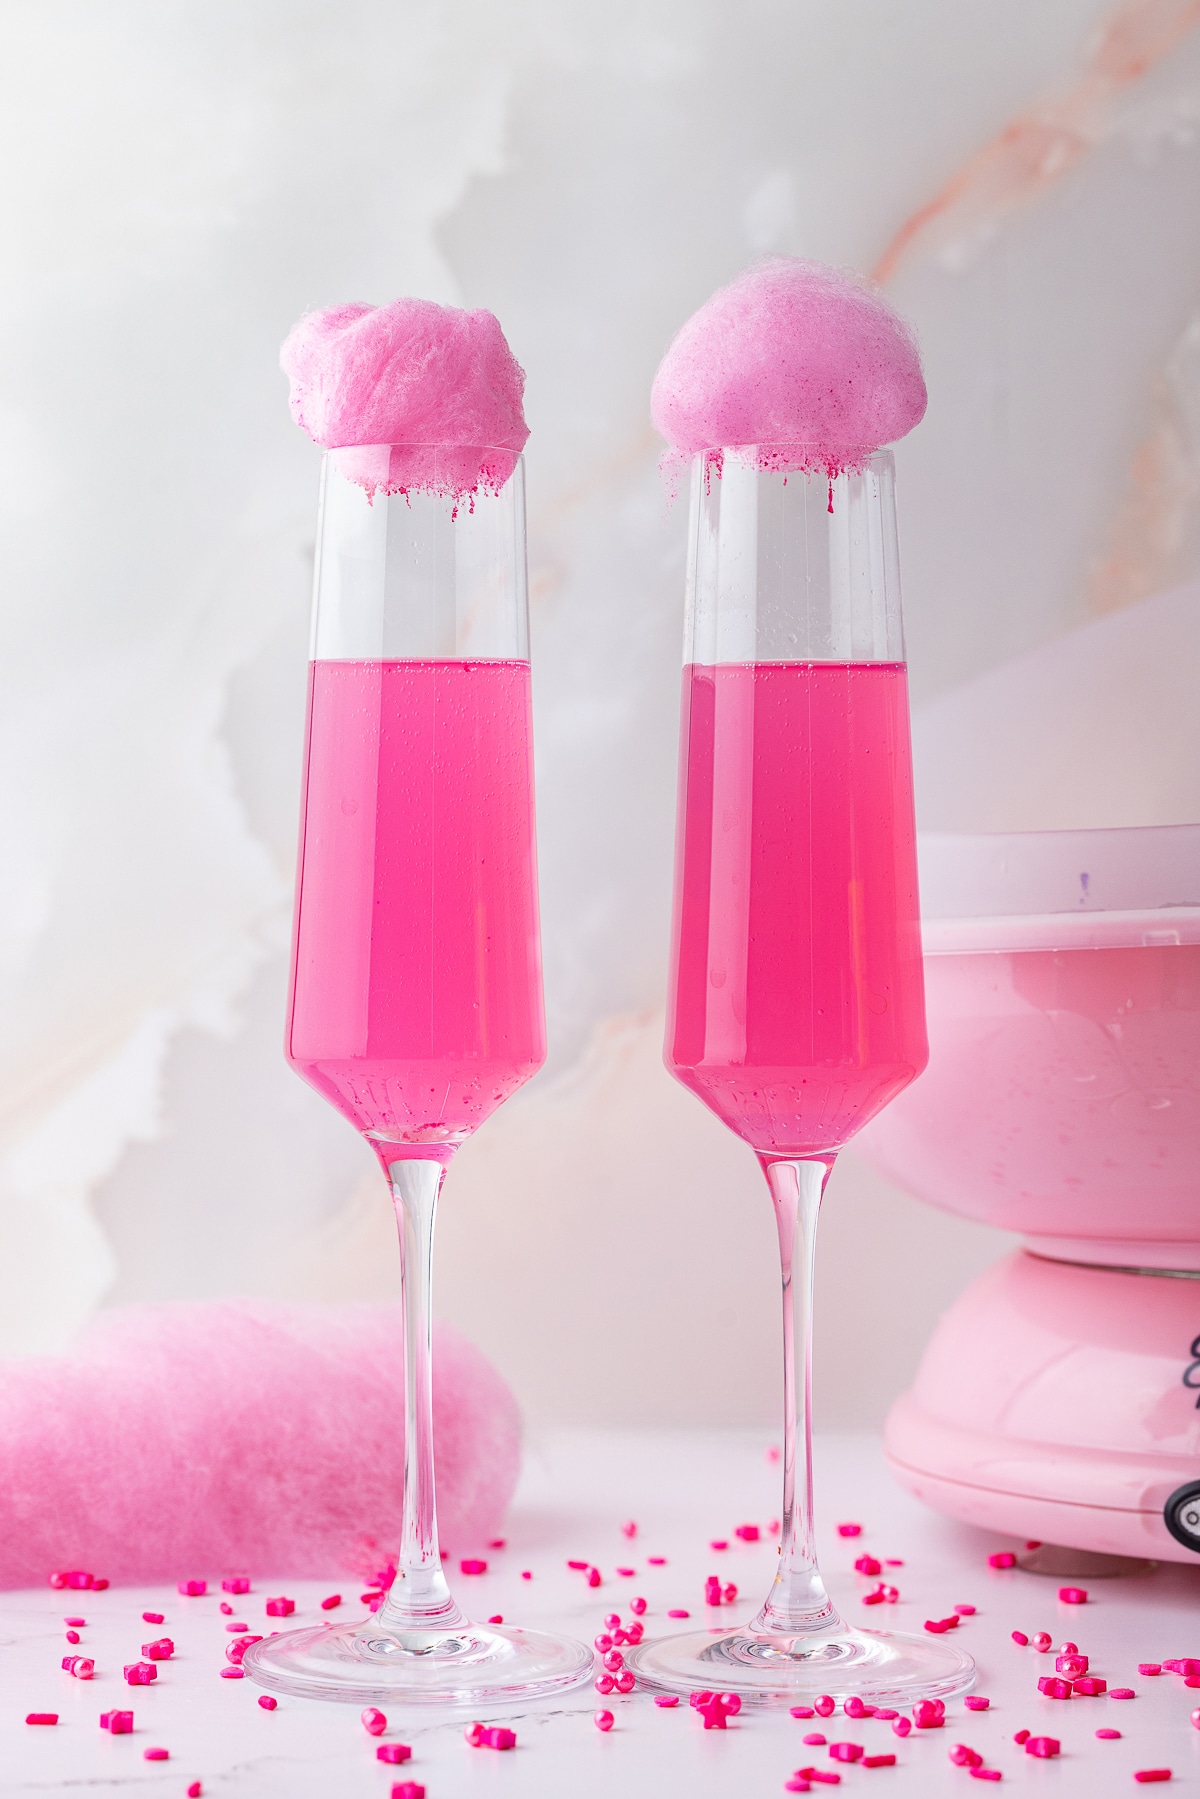 pink cotton candy over a 2 pink champagne flutes, Wilton sprinkles on a white counter with a pink cotton candy machine in the background. 